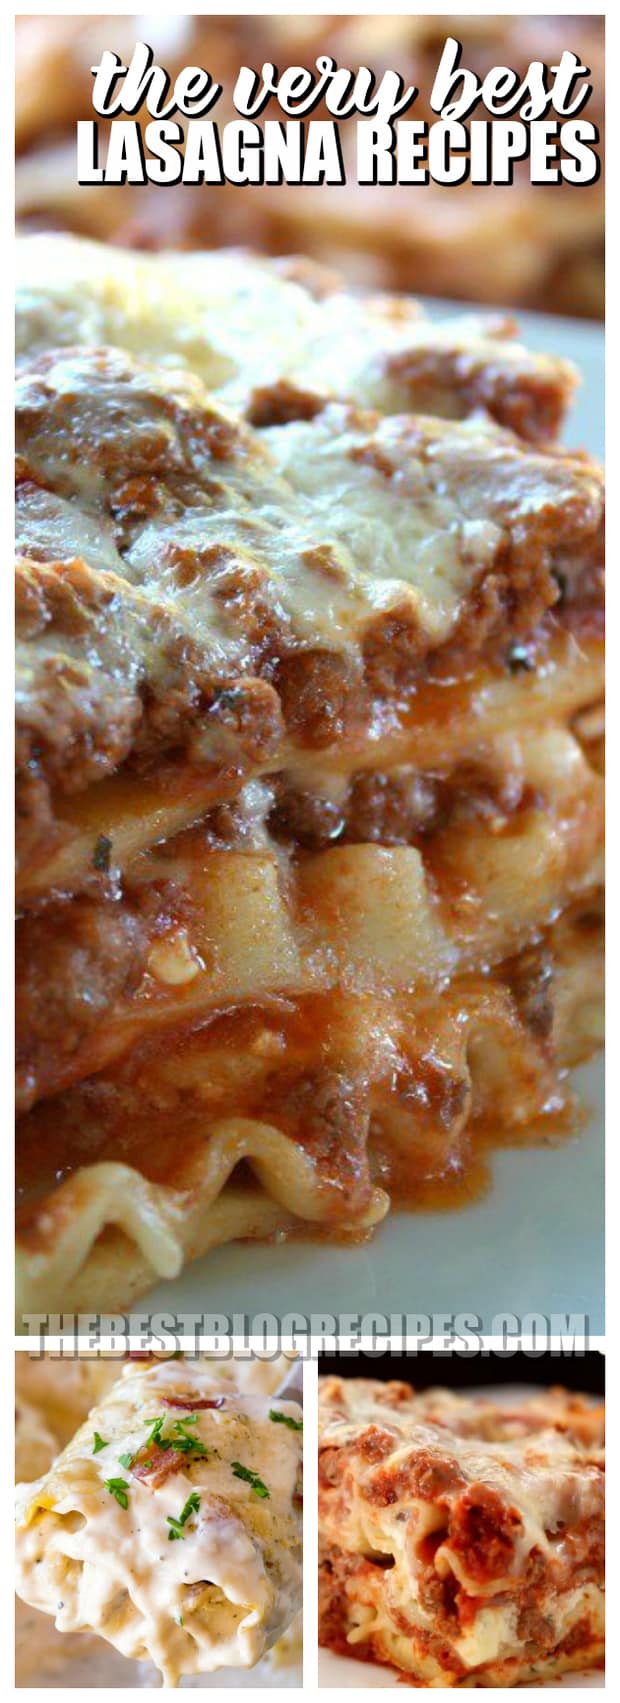 The Best Lasagna Recipes are perfect delicious dinners for any night of the week! With savory flavors and classic appeal, we know that these amazing lasagna recipes will become new family favorites!